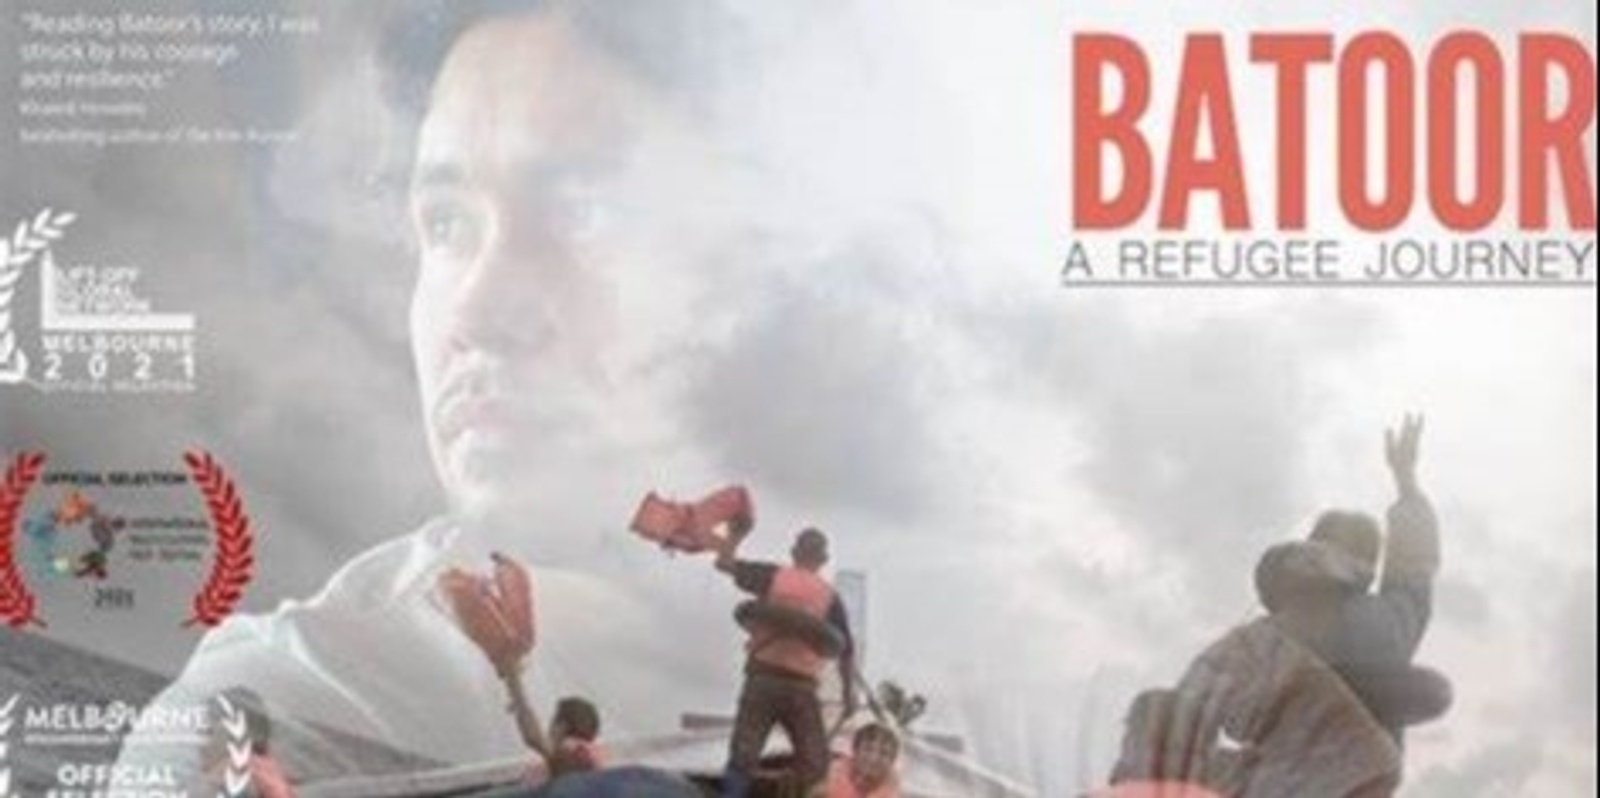 Banner image for Film "Batoor - a refugee journey" and discussion with Barat Ali Batoor and Richard di Natale